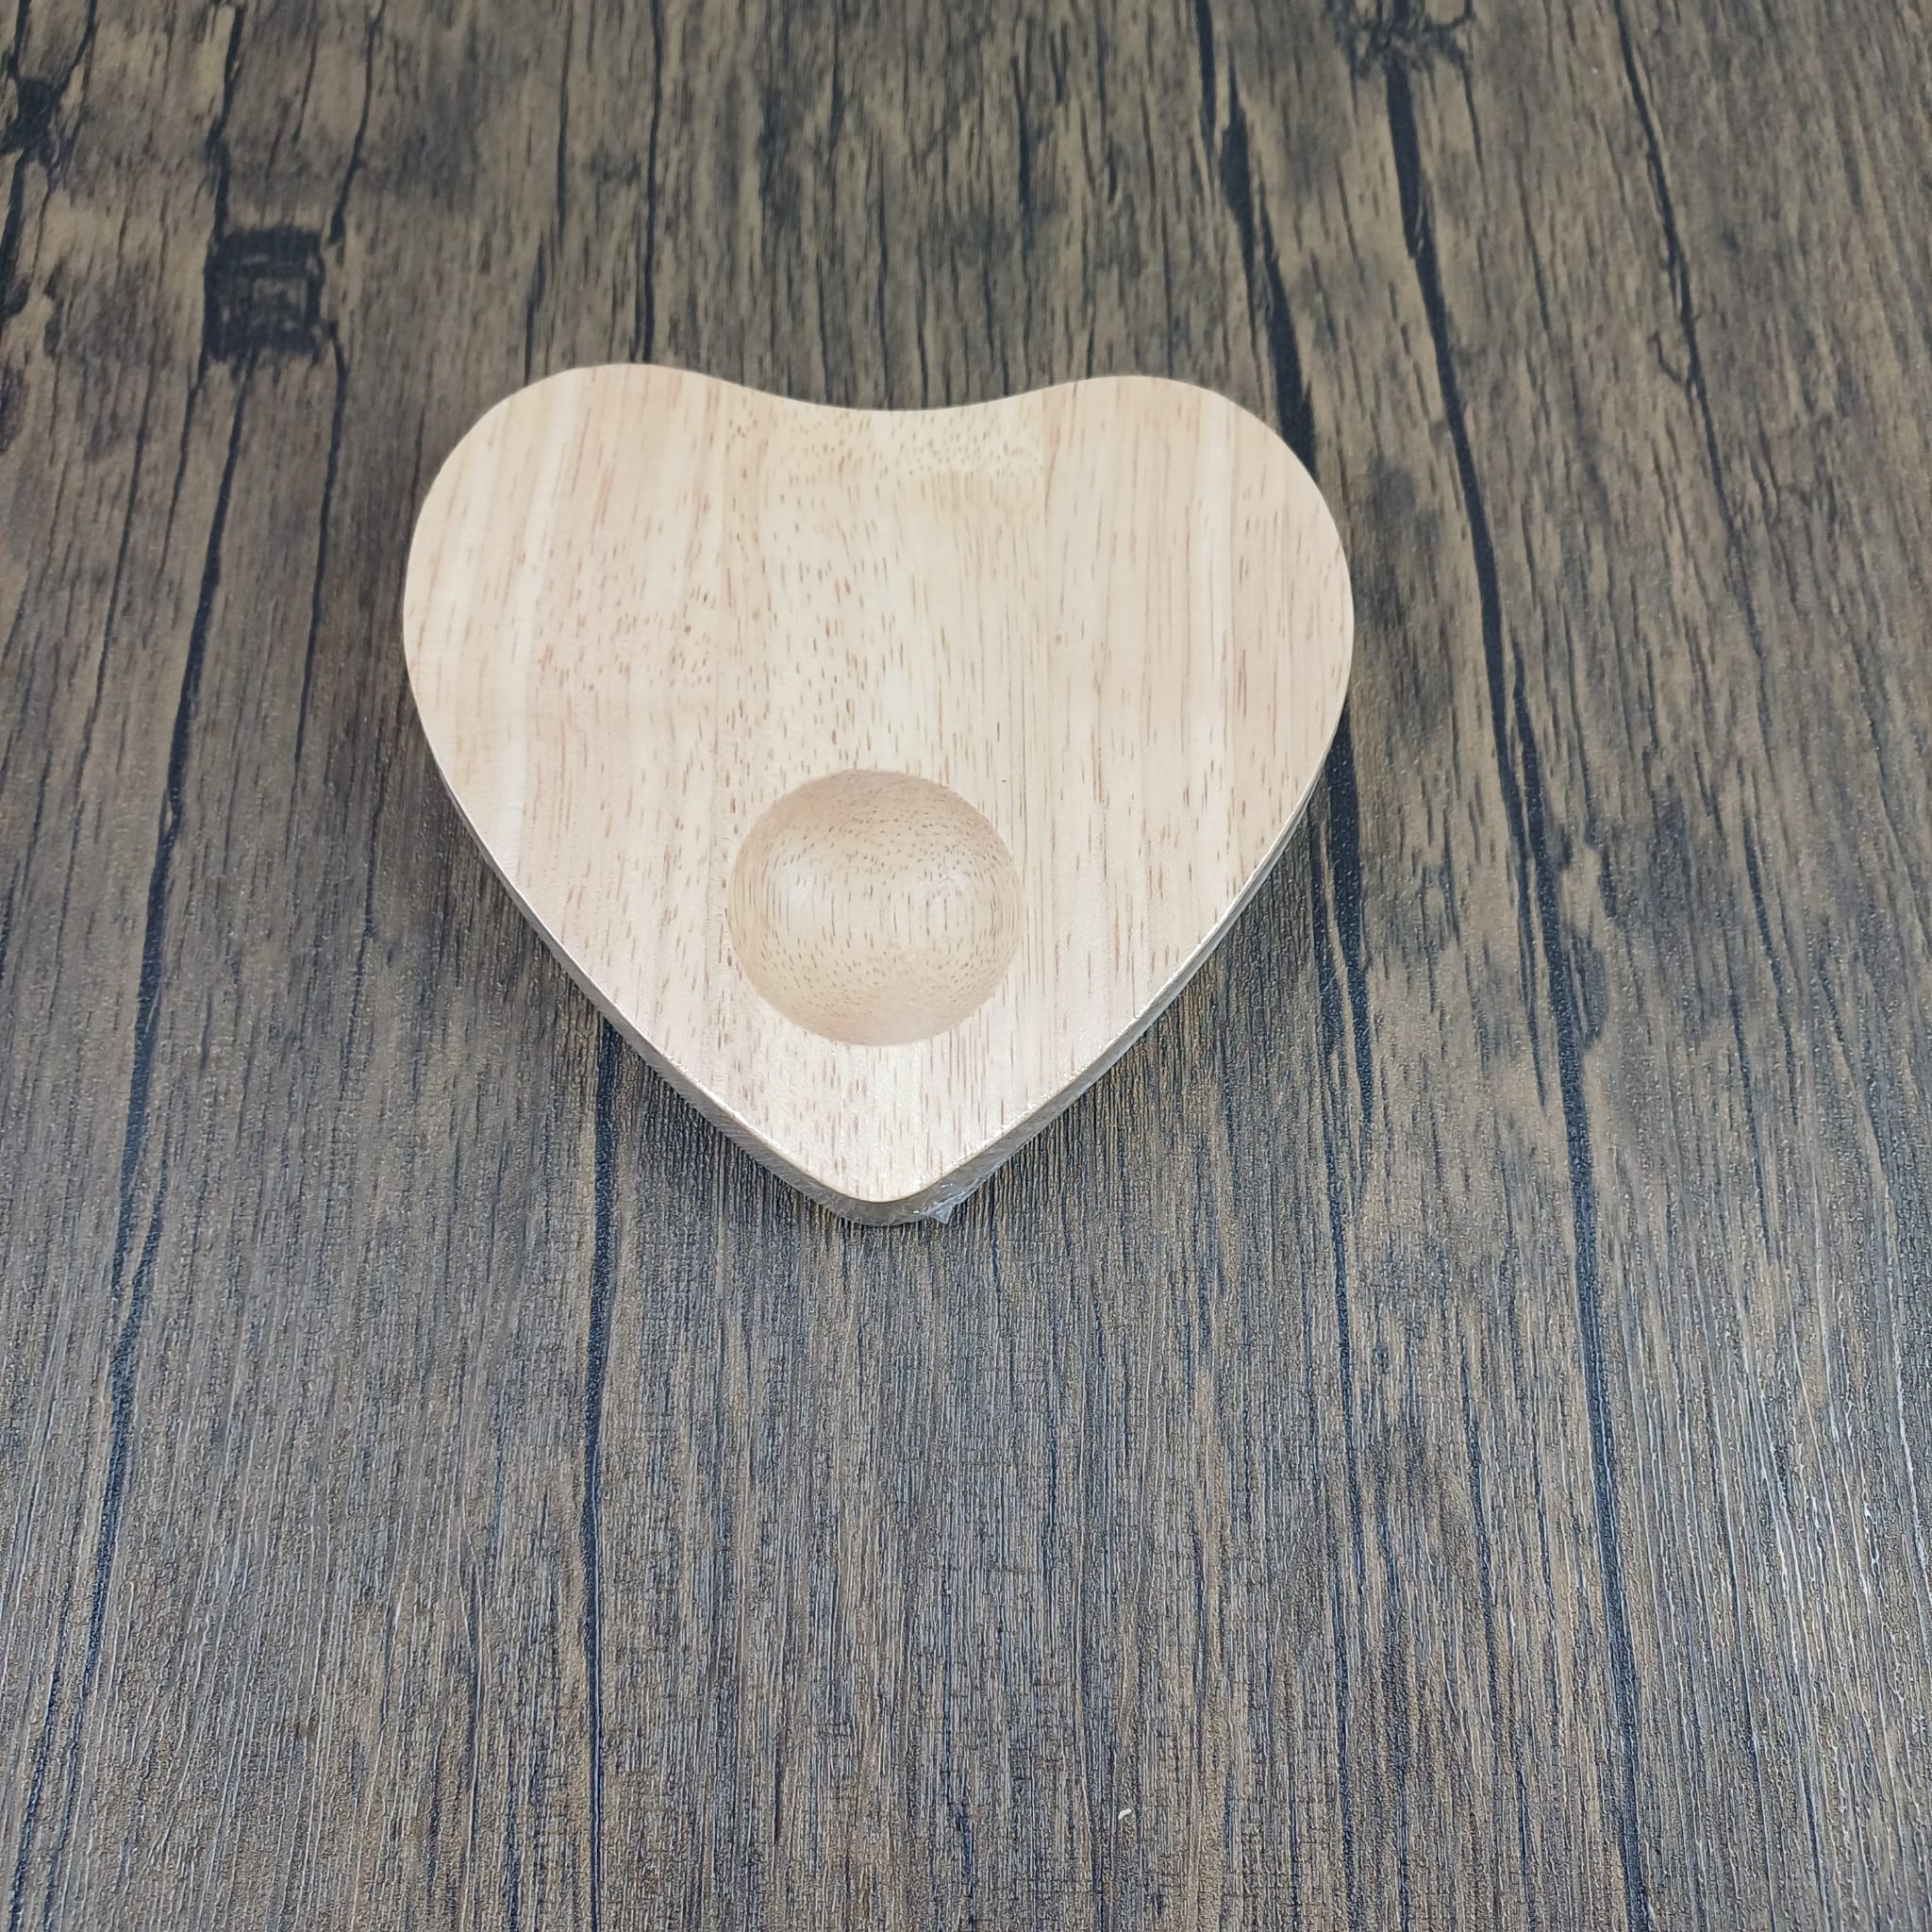 Heart Egg Board blank for engraving and personalising. Apollo brand